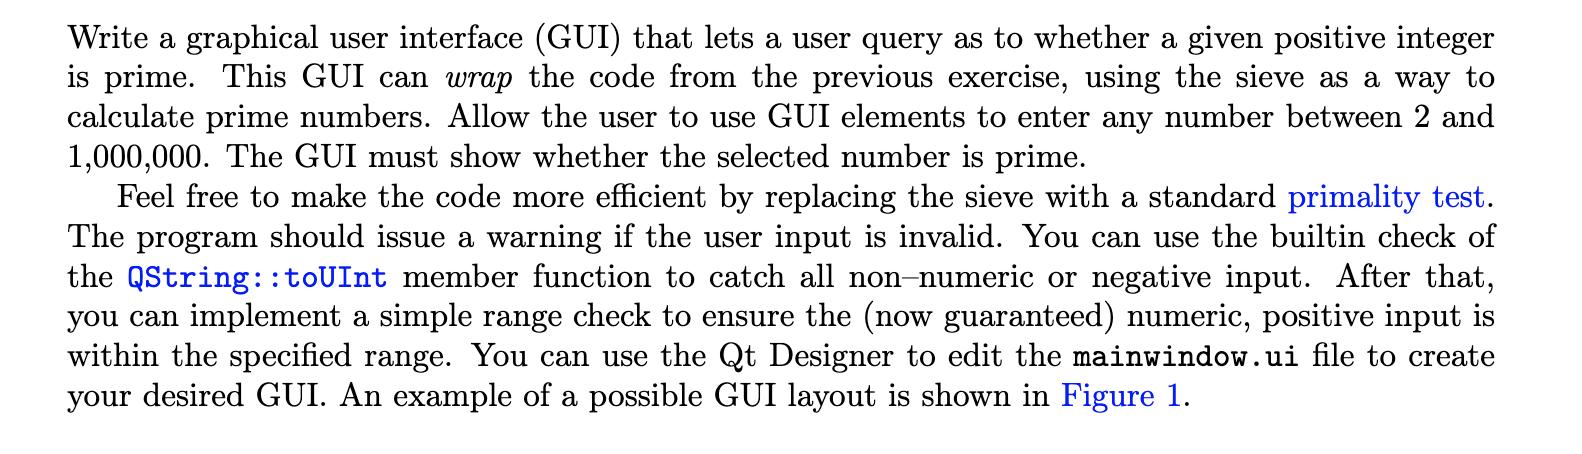 Write a graphical user interface (GUI) that lets a user query as to whether a given positive integer is